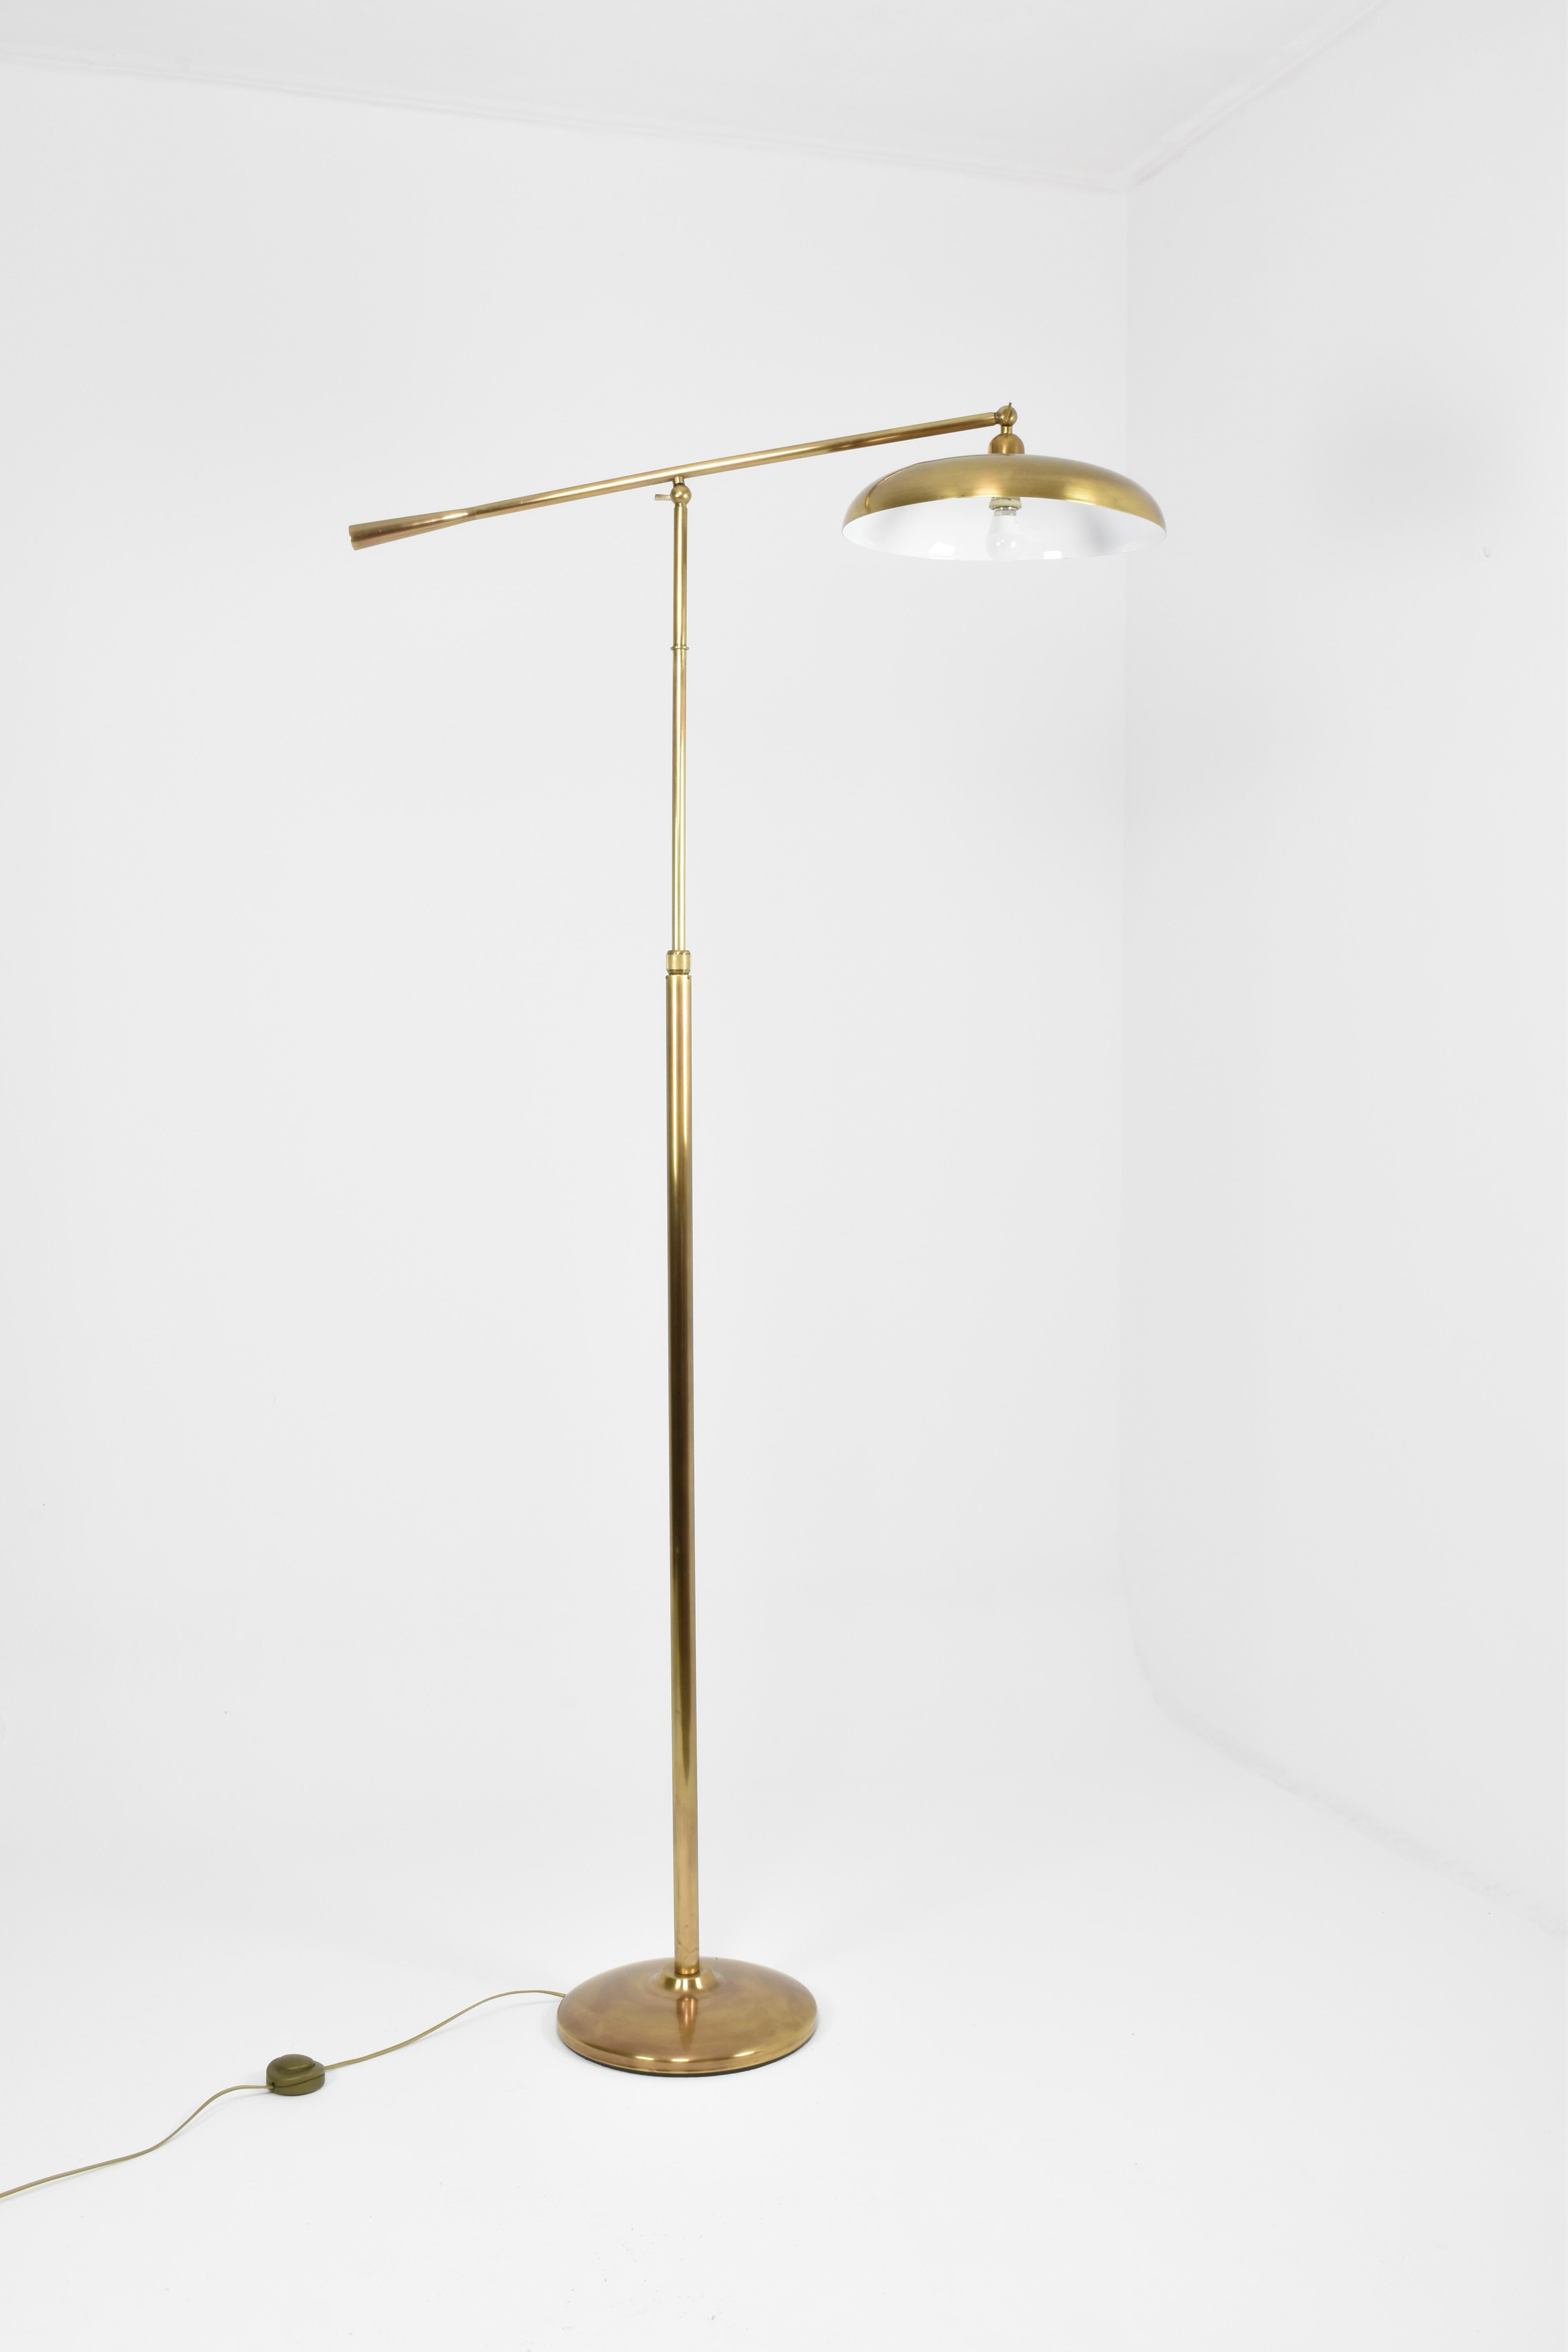 Vintage Italian brass floor lamp from the 1960s, featuring an adjustable arm and a circular shade. Crafted with exquisite attention to detail, this practical statement lighting piece is both timeless and elegant. 

Maximum height of 195 cm
Minimum